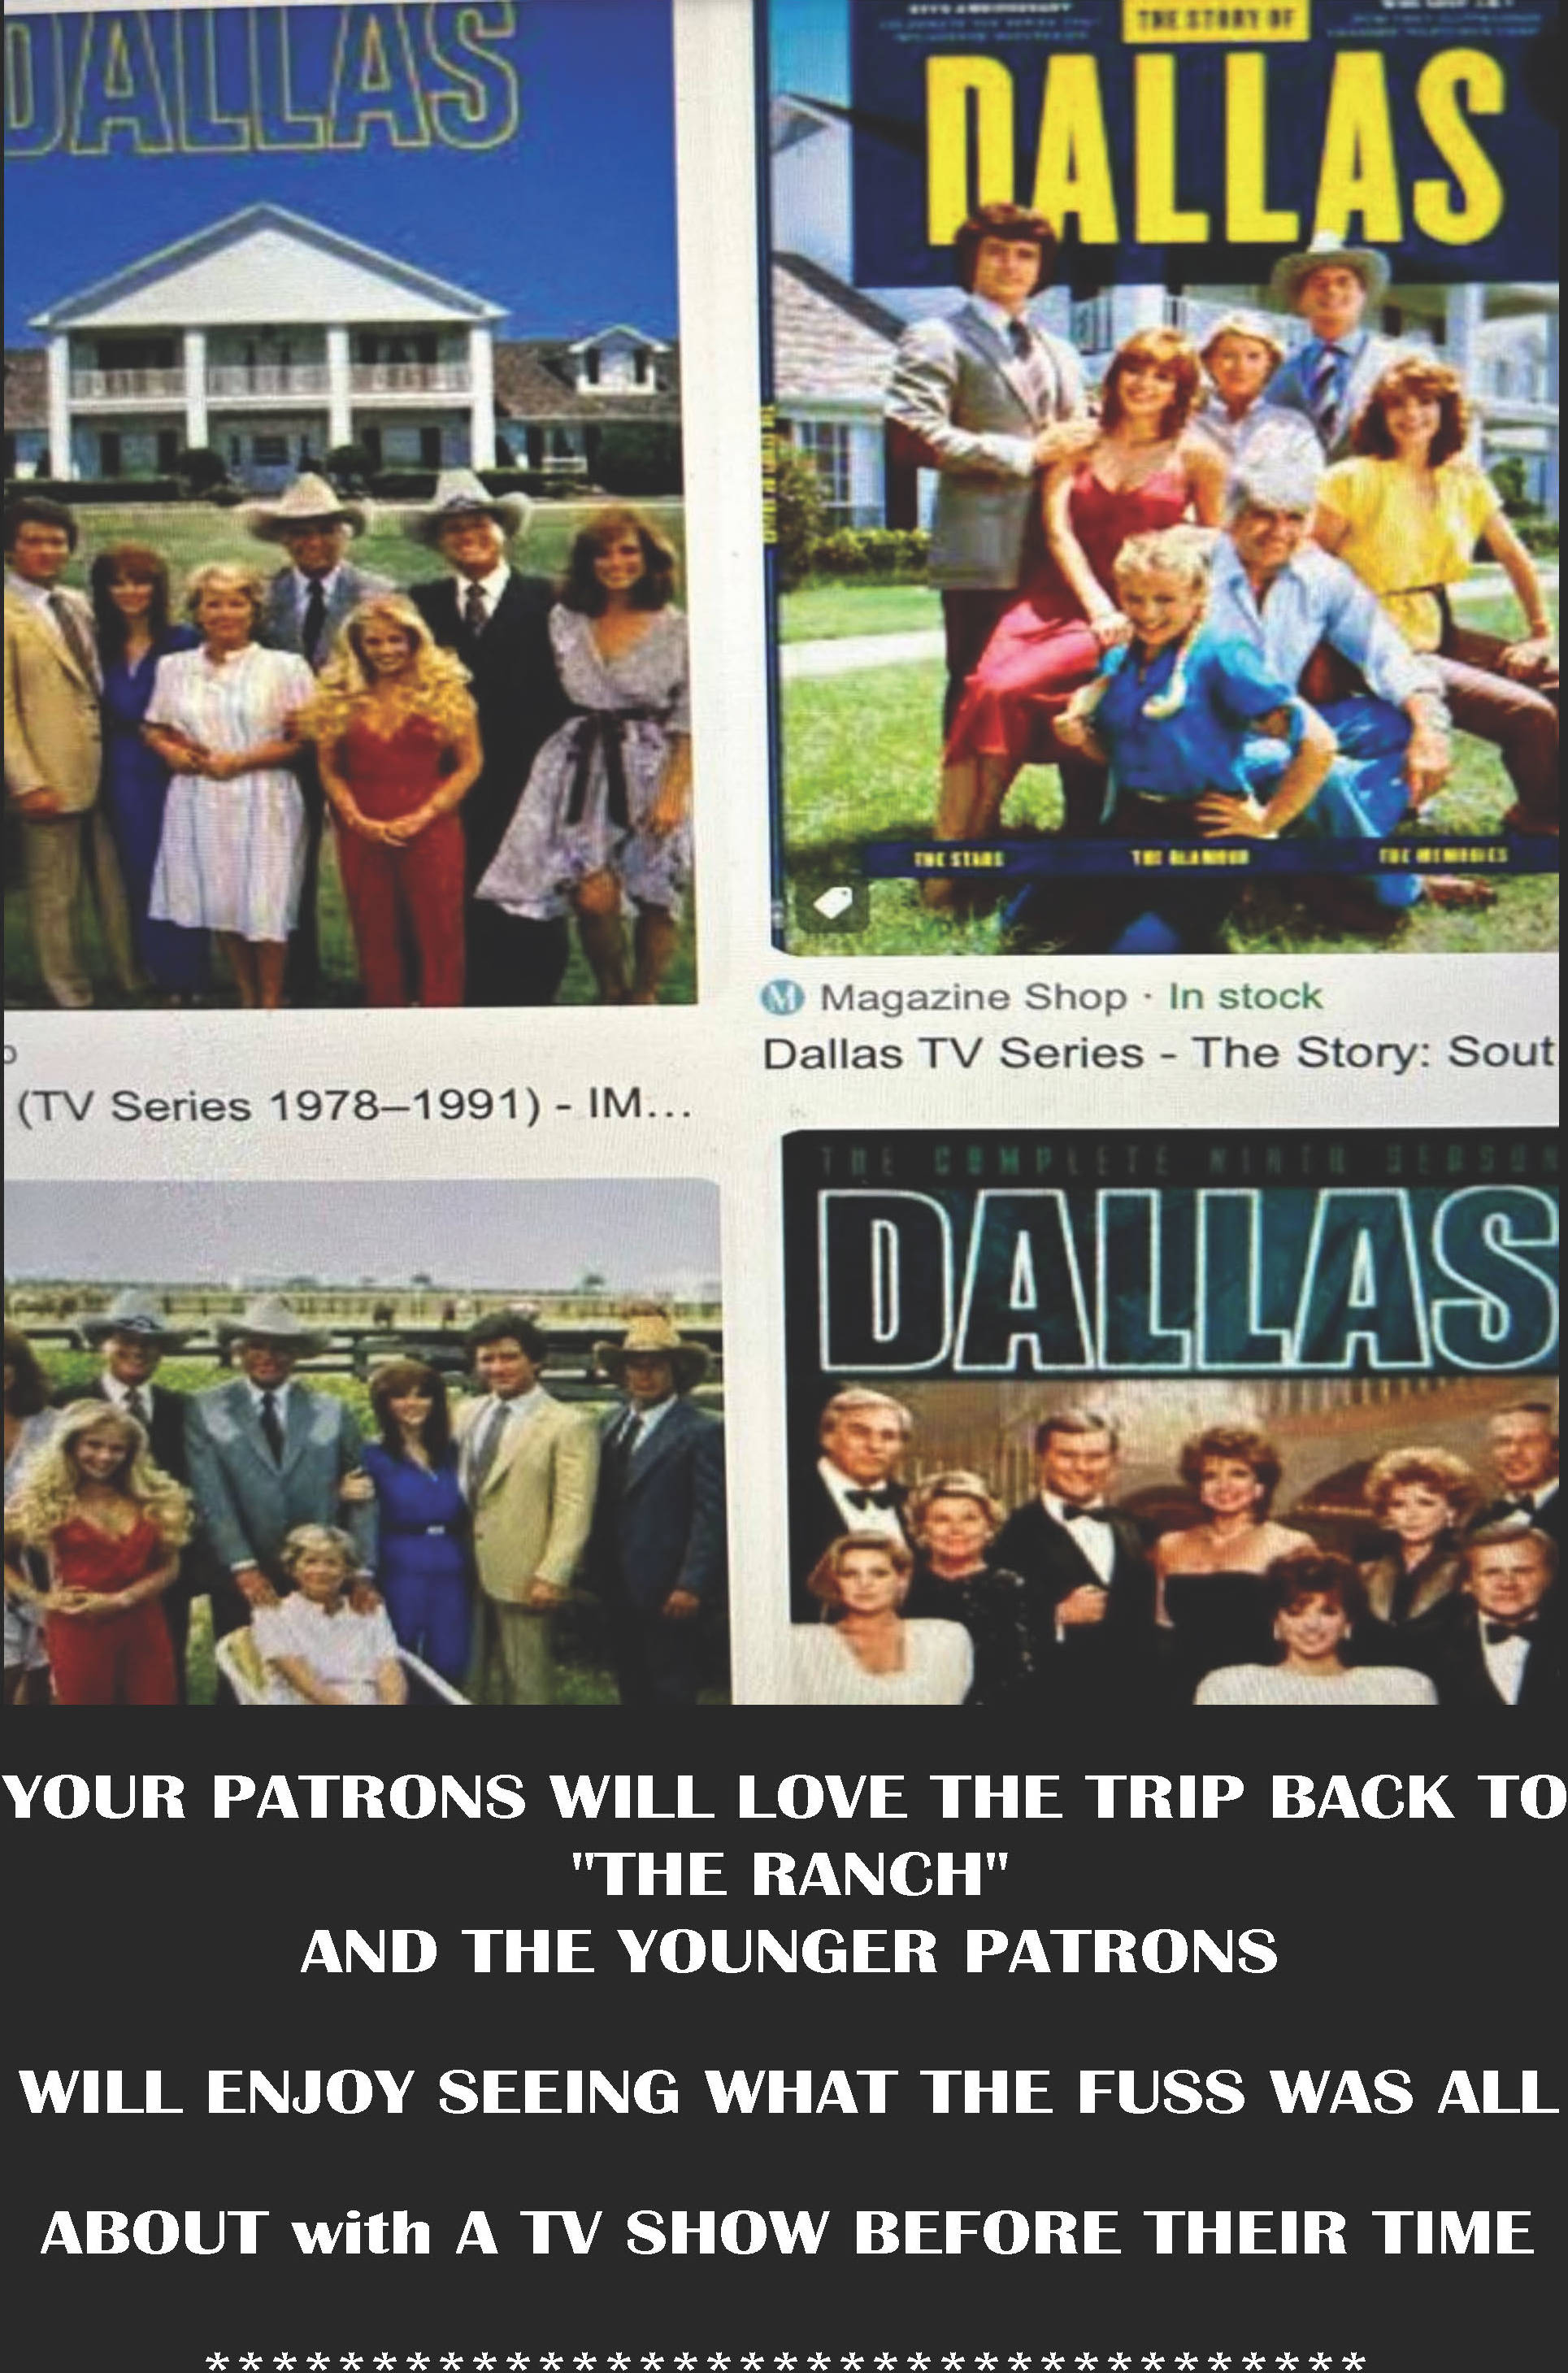 Your patrons will love the trip back to The Ranch and the younger patrons will enjoy seeing what the fuss was all about with a TV show before their time